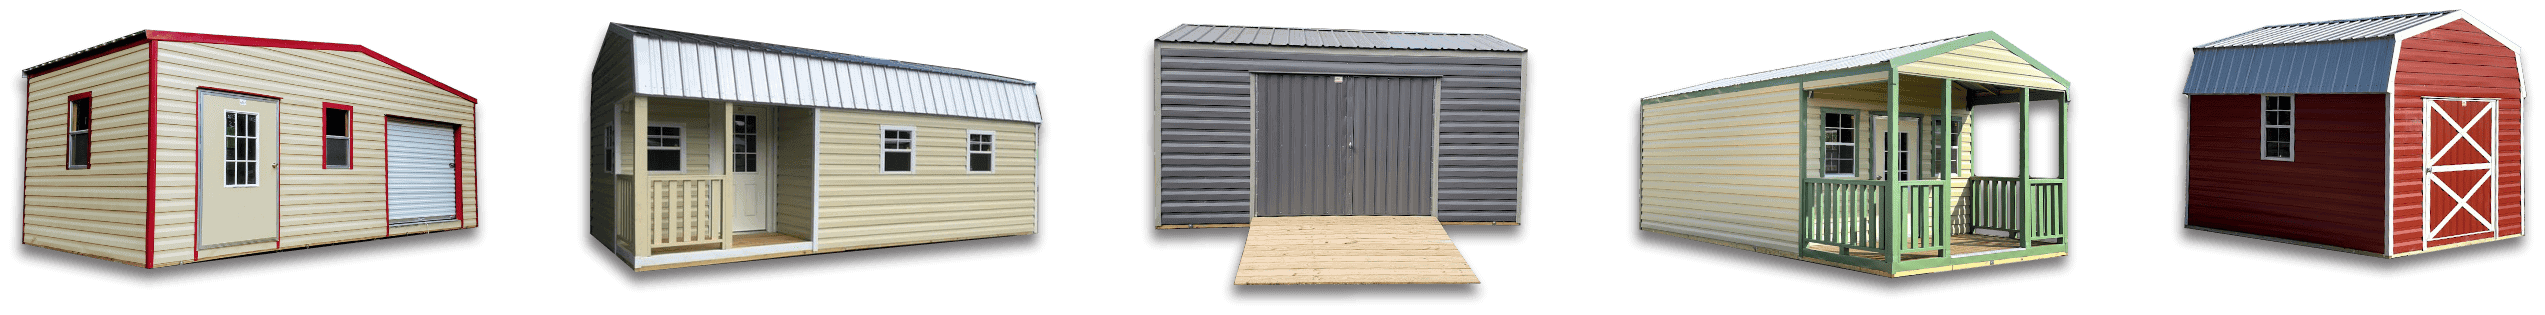 Explore 14x40 sheds for sale at Robin Sheds - The leading shed dealer. Our selection includes portable buildings, outdoor storage solutions, and storage sheds. Discover the perfect 14x40 shed style for your needs. Shop now!